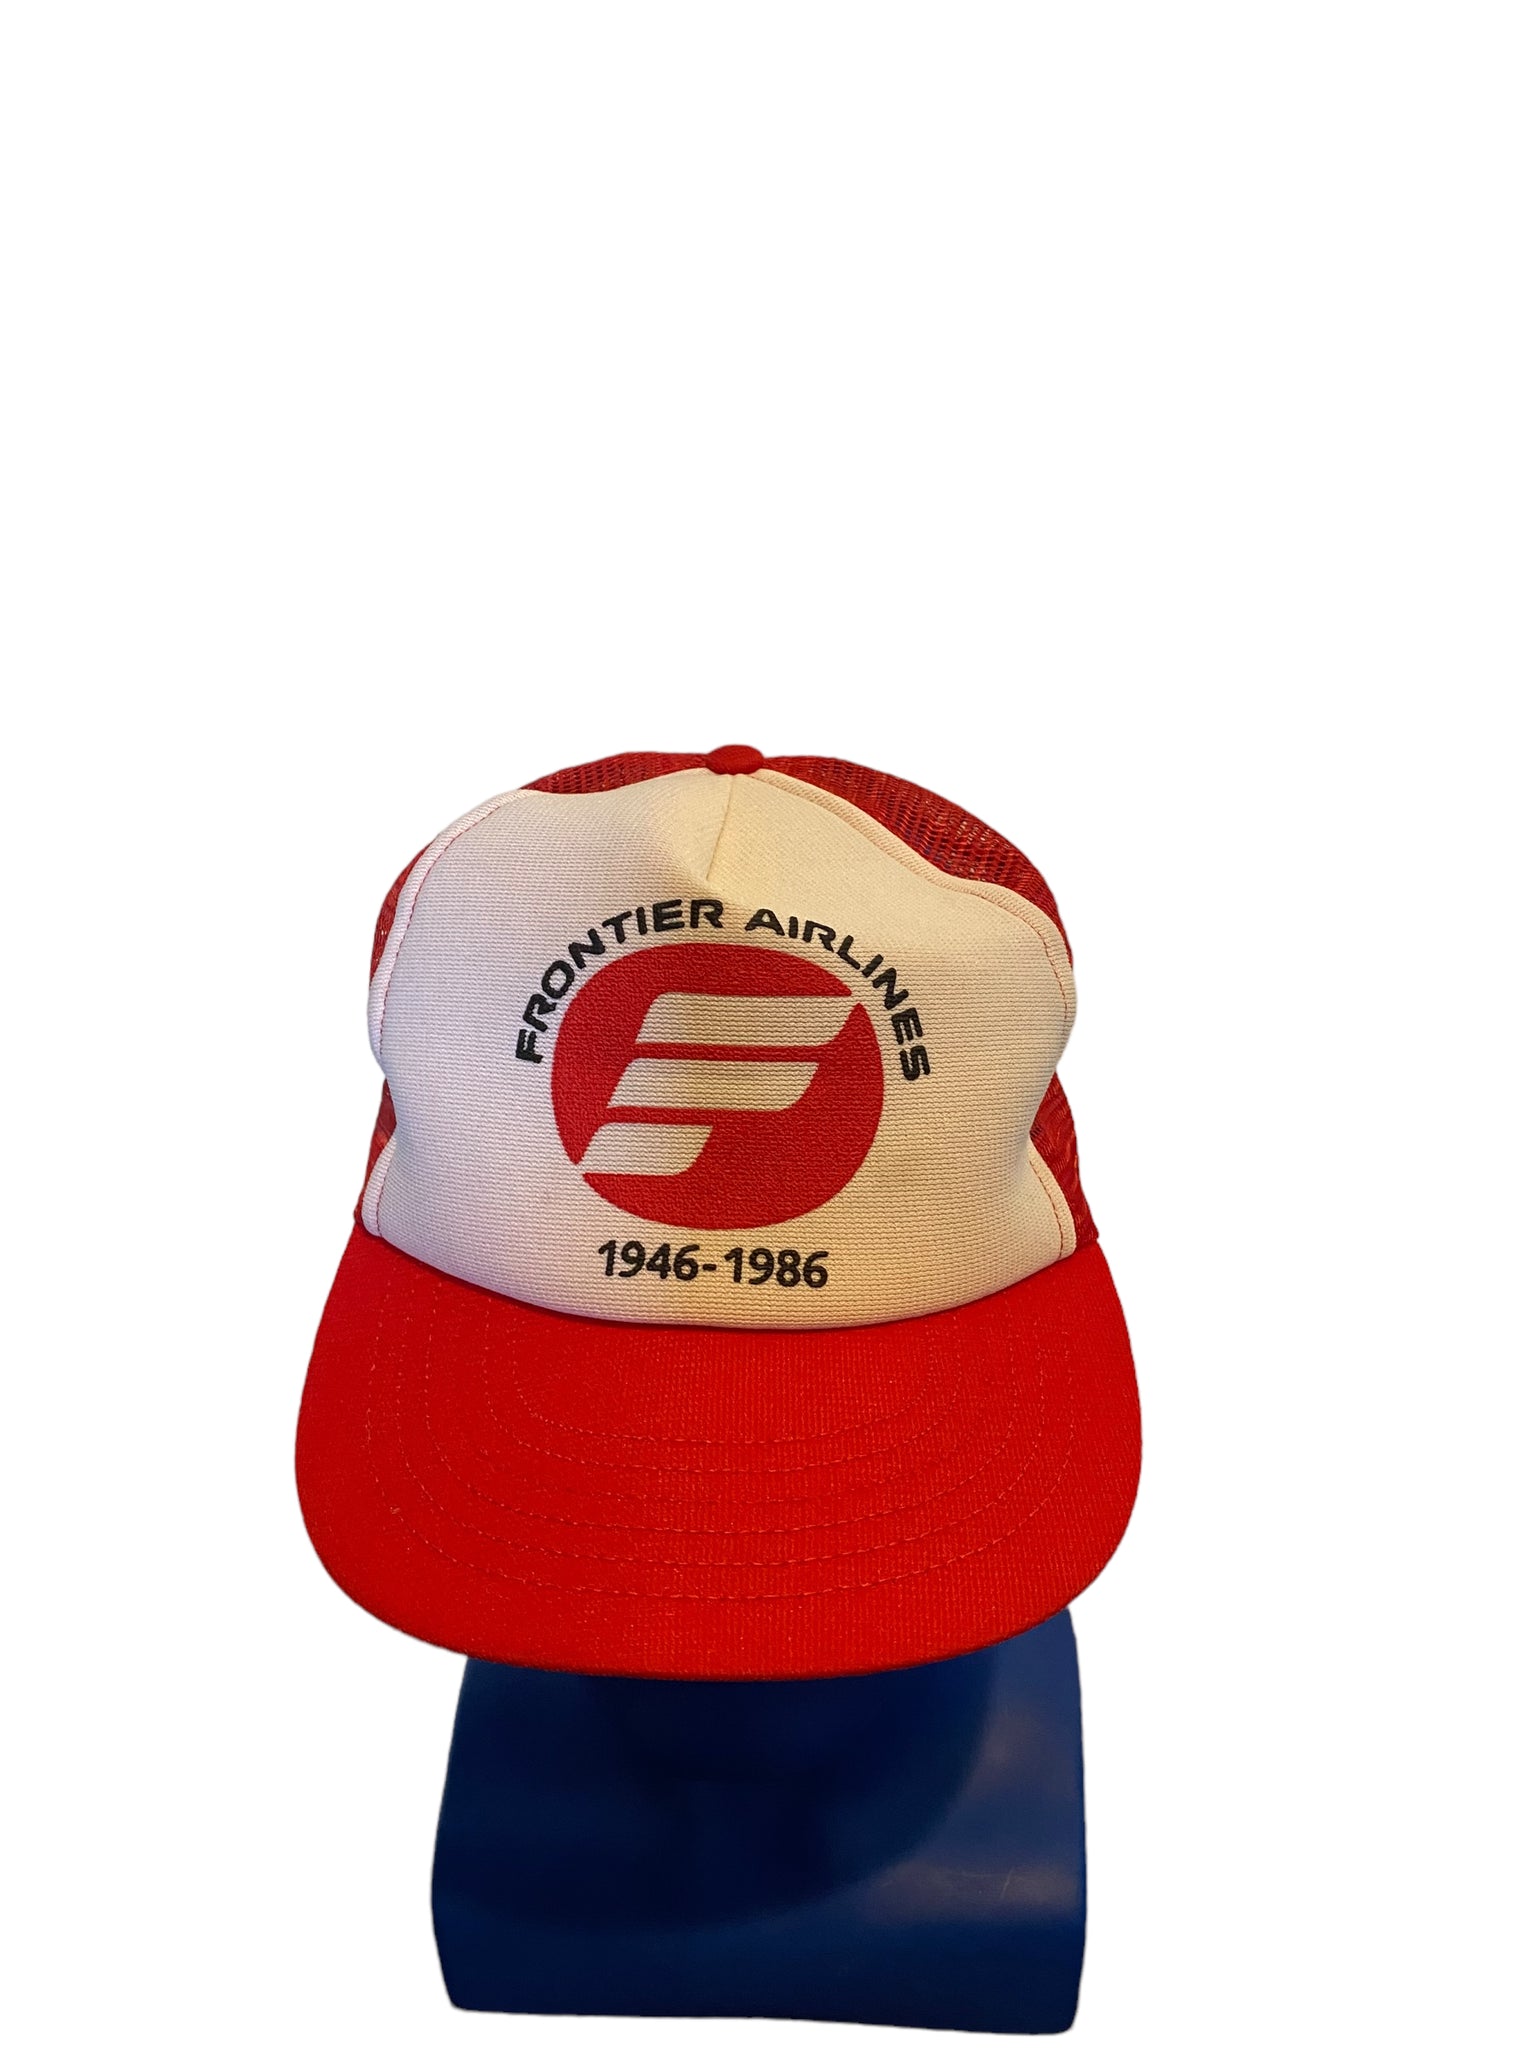 vintage frontier airlines 1946-1986 trucker hat red and white snapback